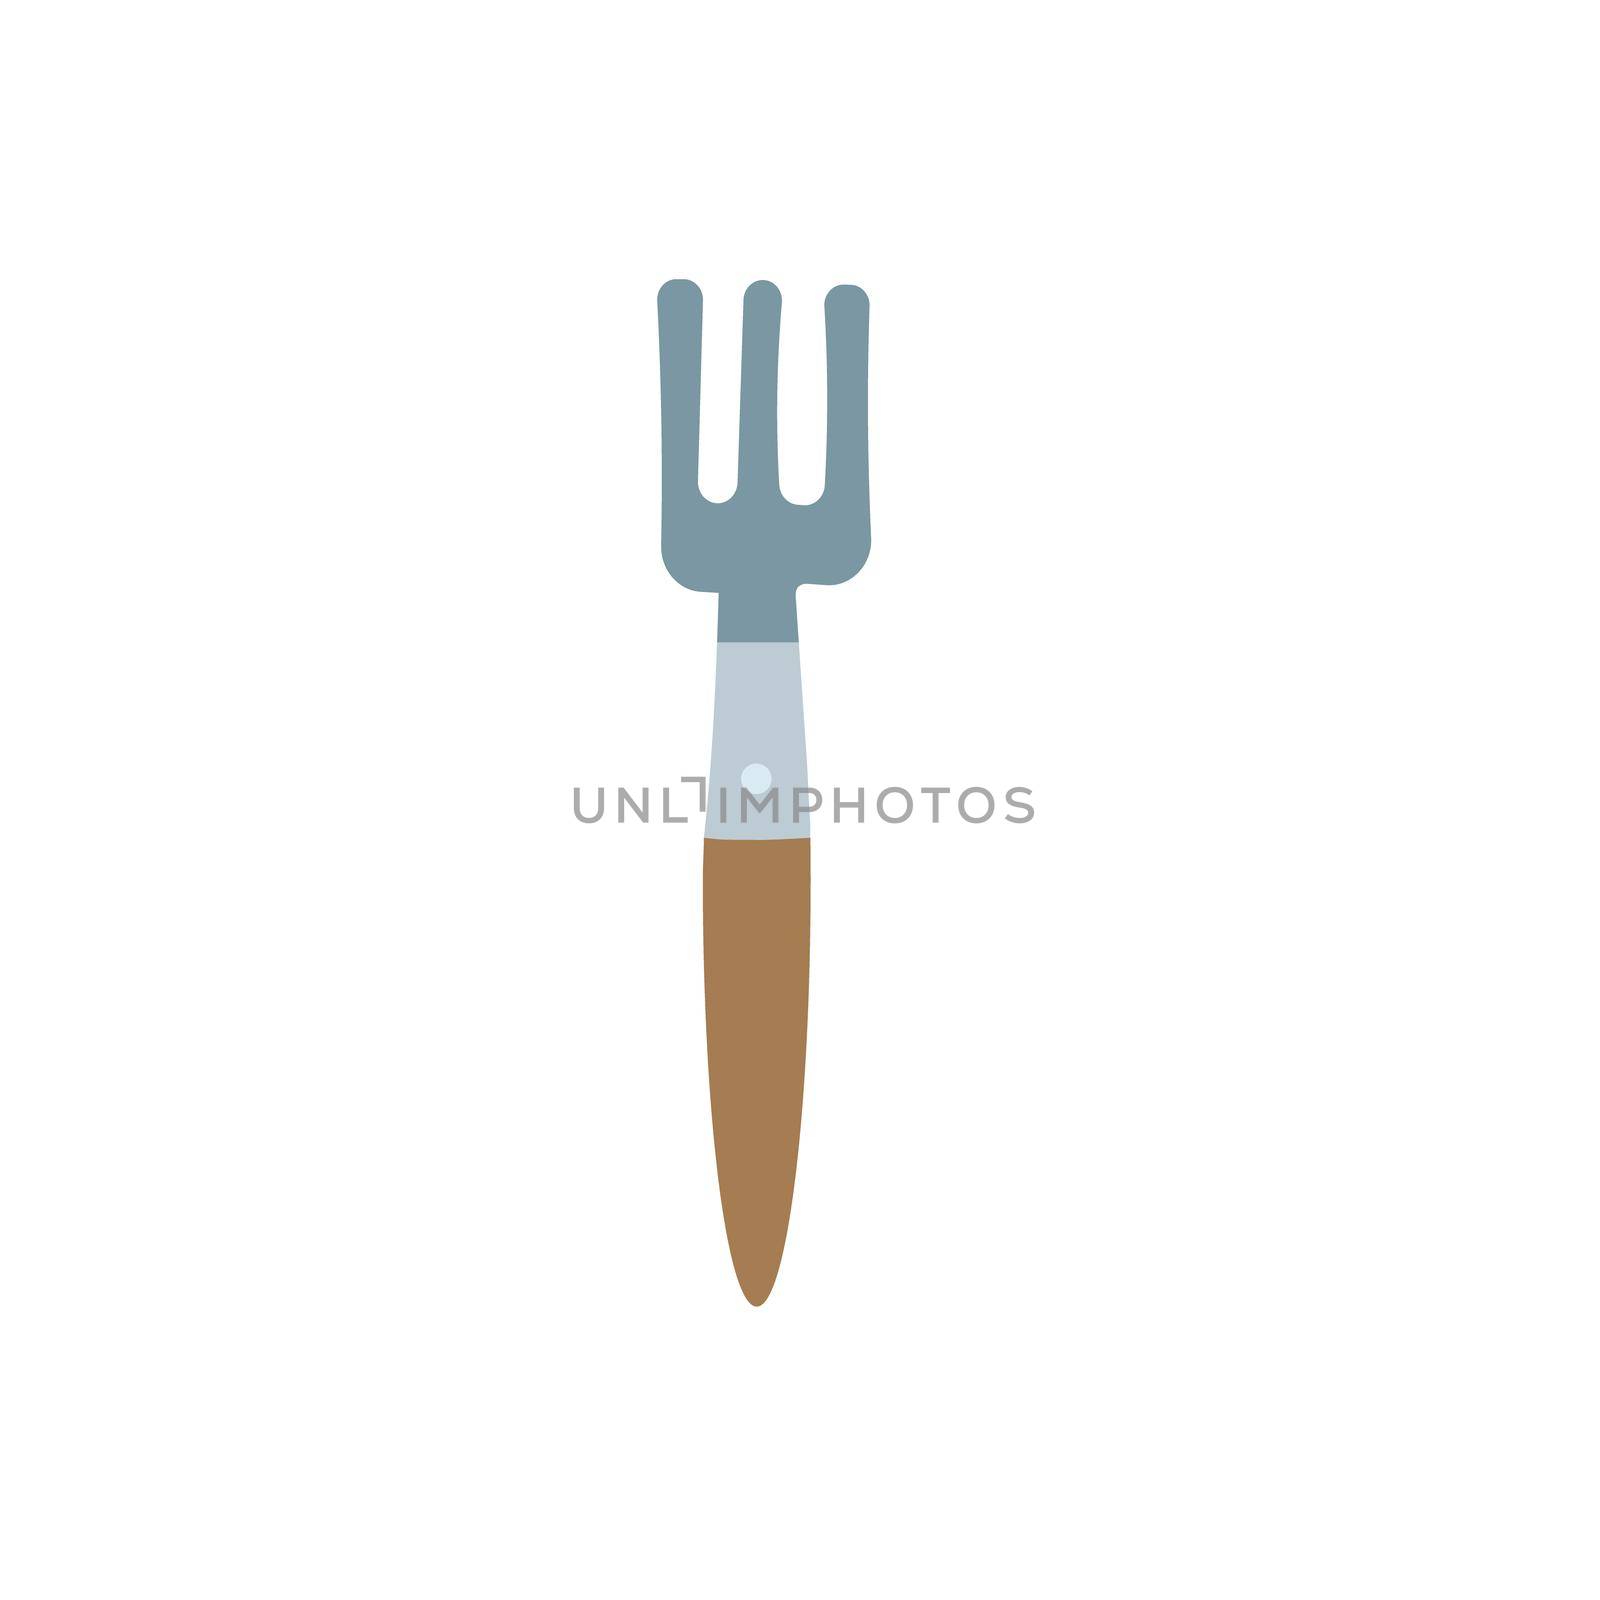 Garden tool vector illustration on white background. Equipment for gardening - simple hand drawn style